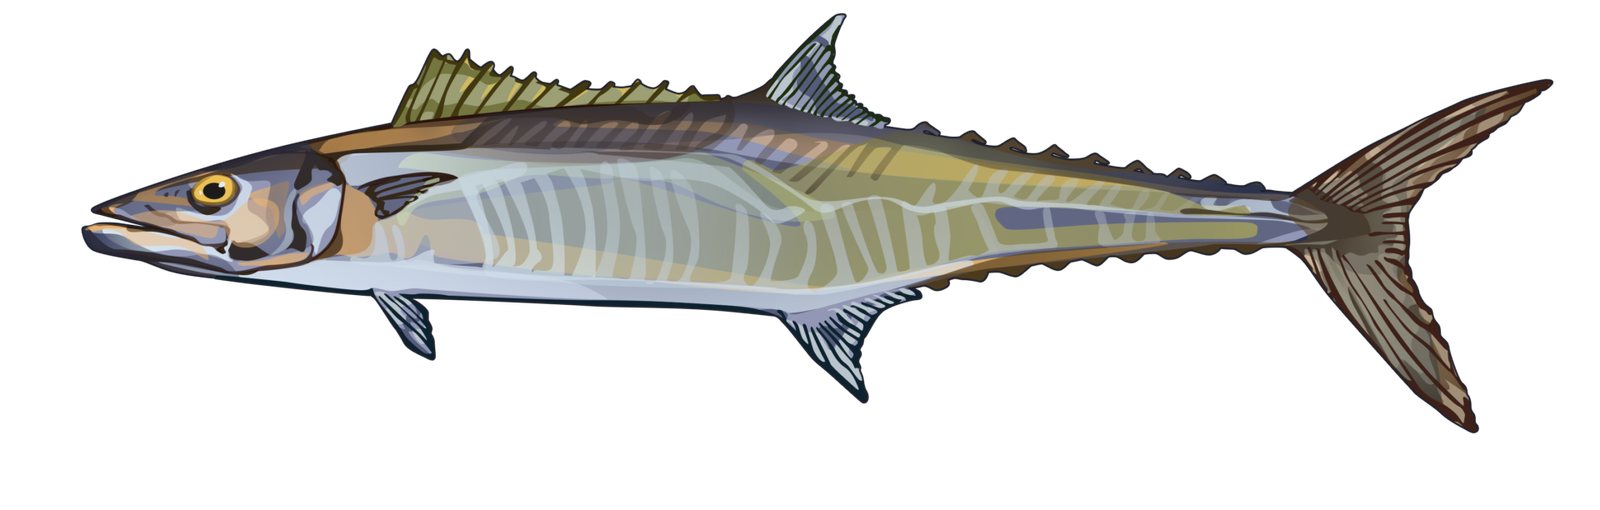 Tag Archive for Spanish Mackerel